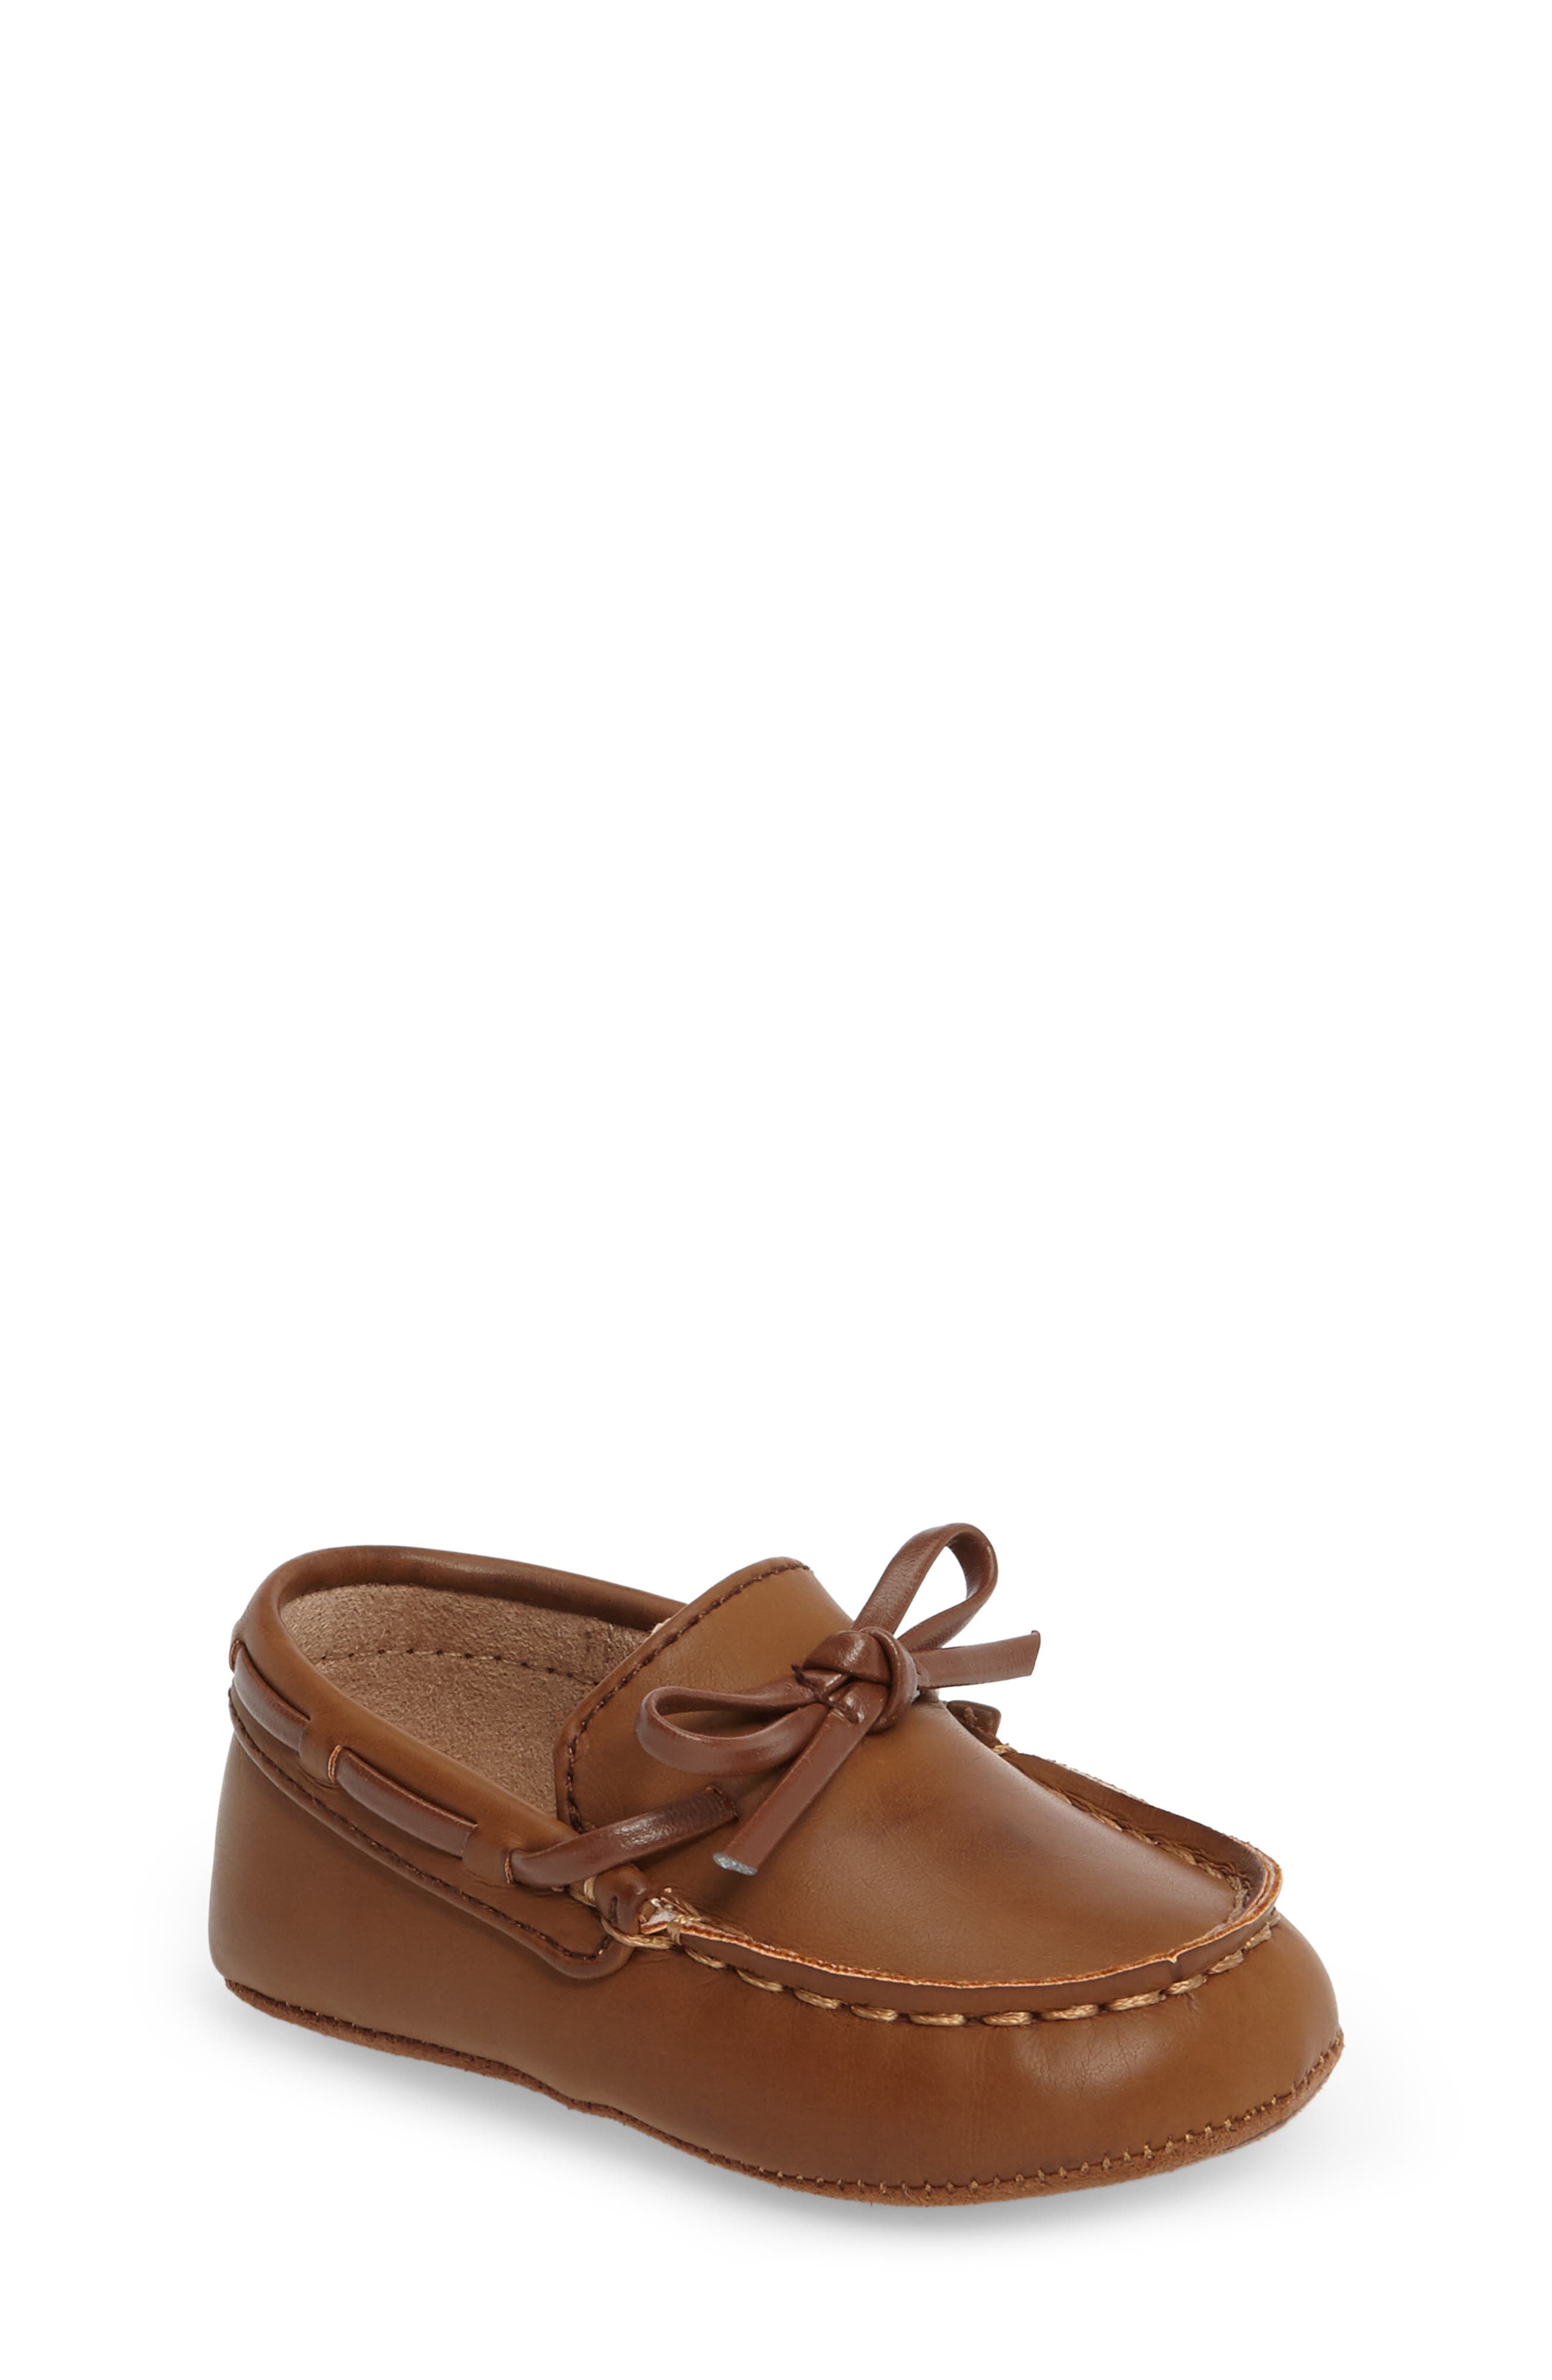 Kenneth Cole New York Baby Boat Shoe 